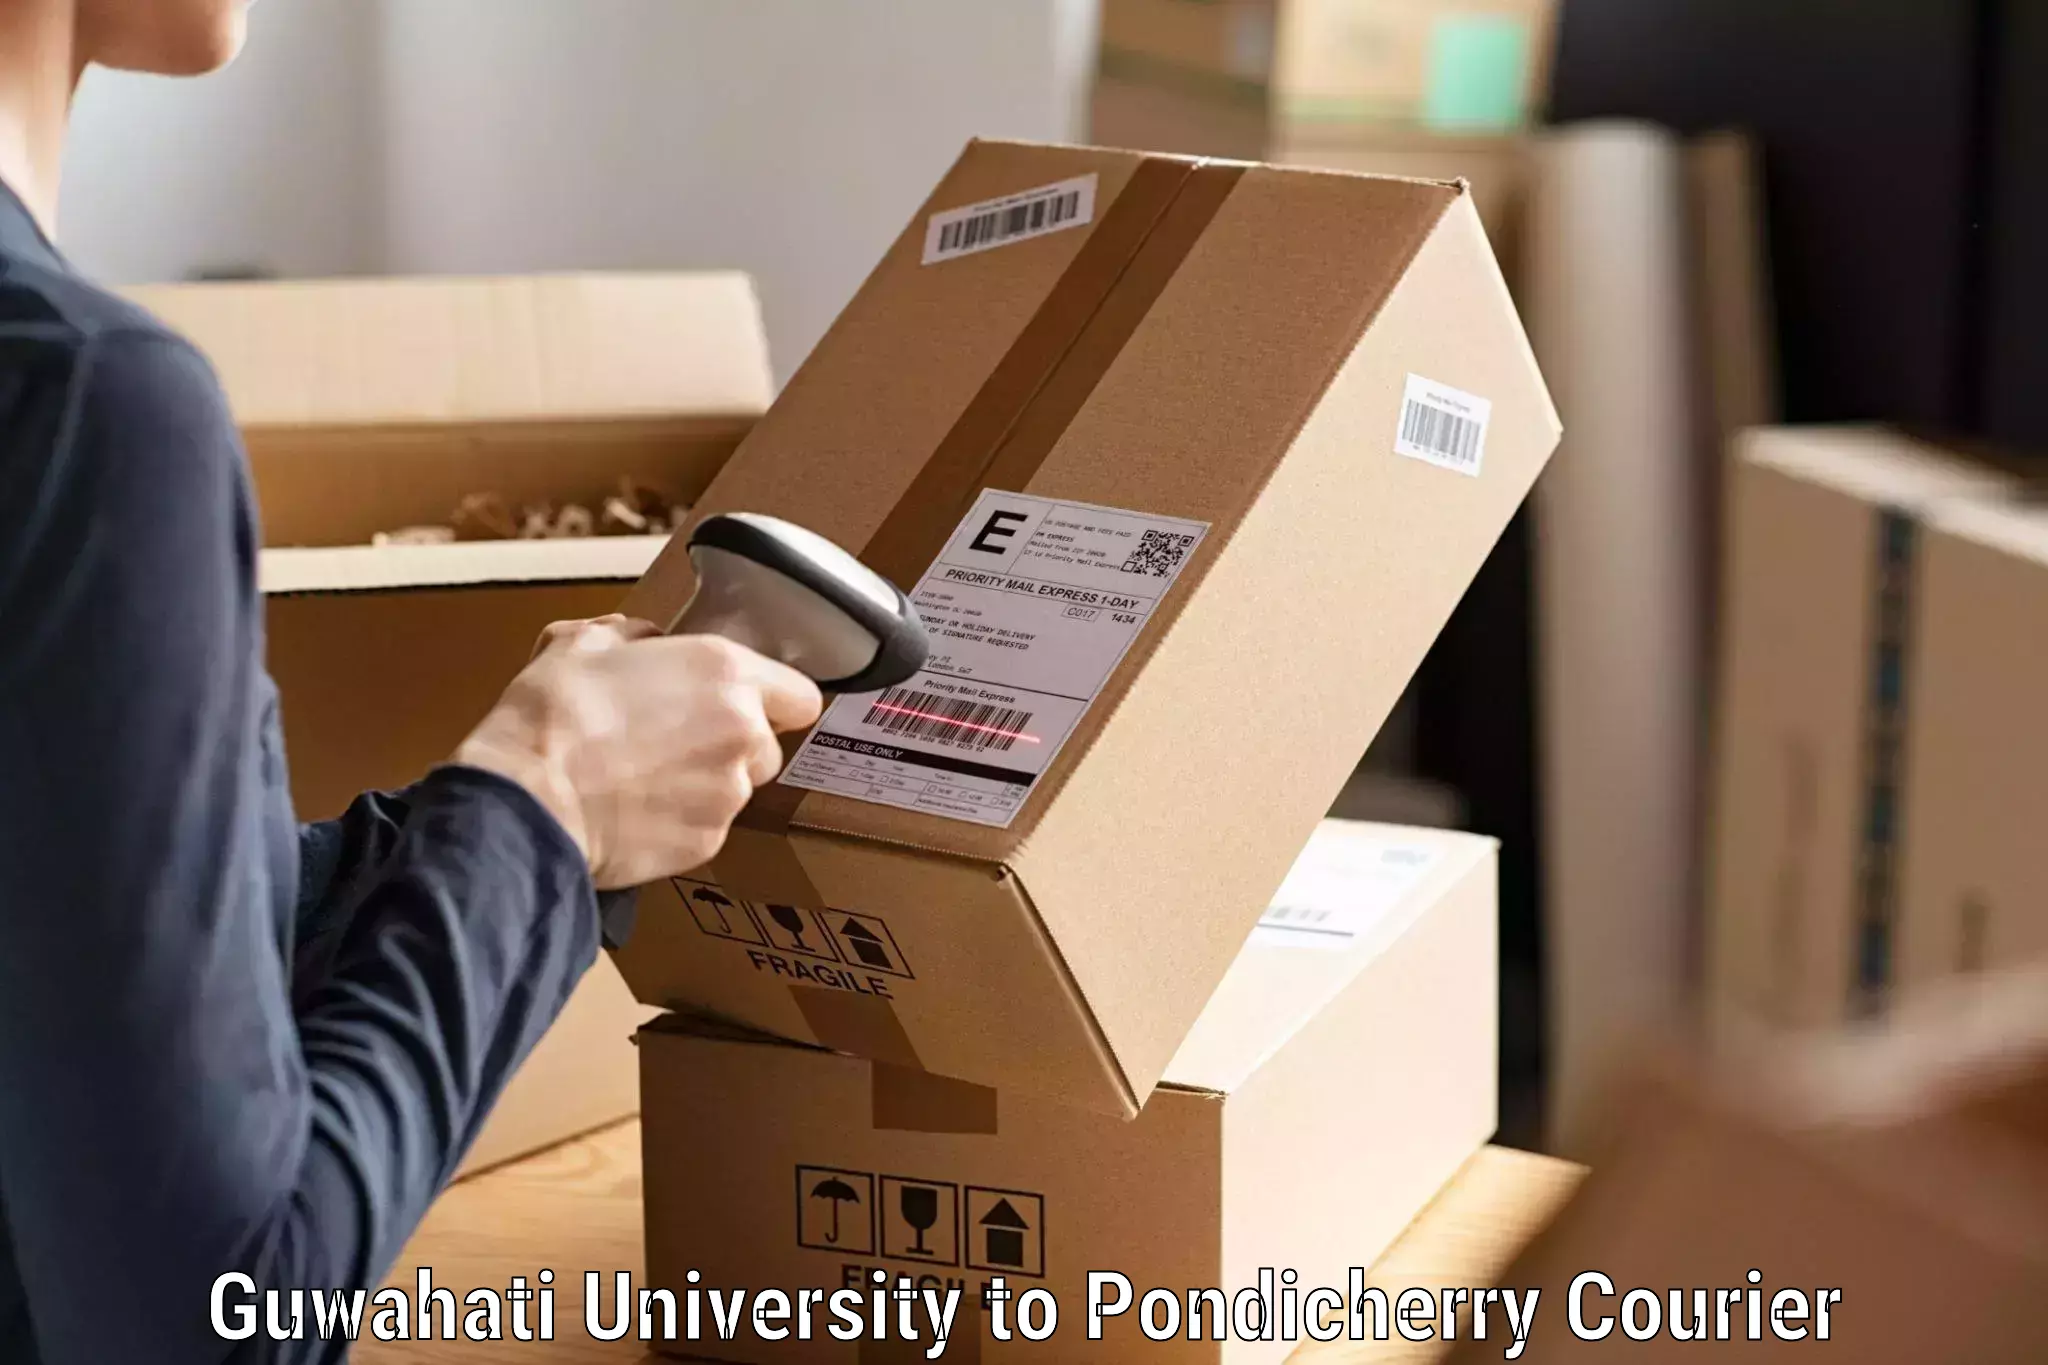 Express delivery solutions in Guwahati University to Pondicherry